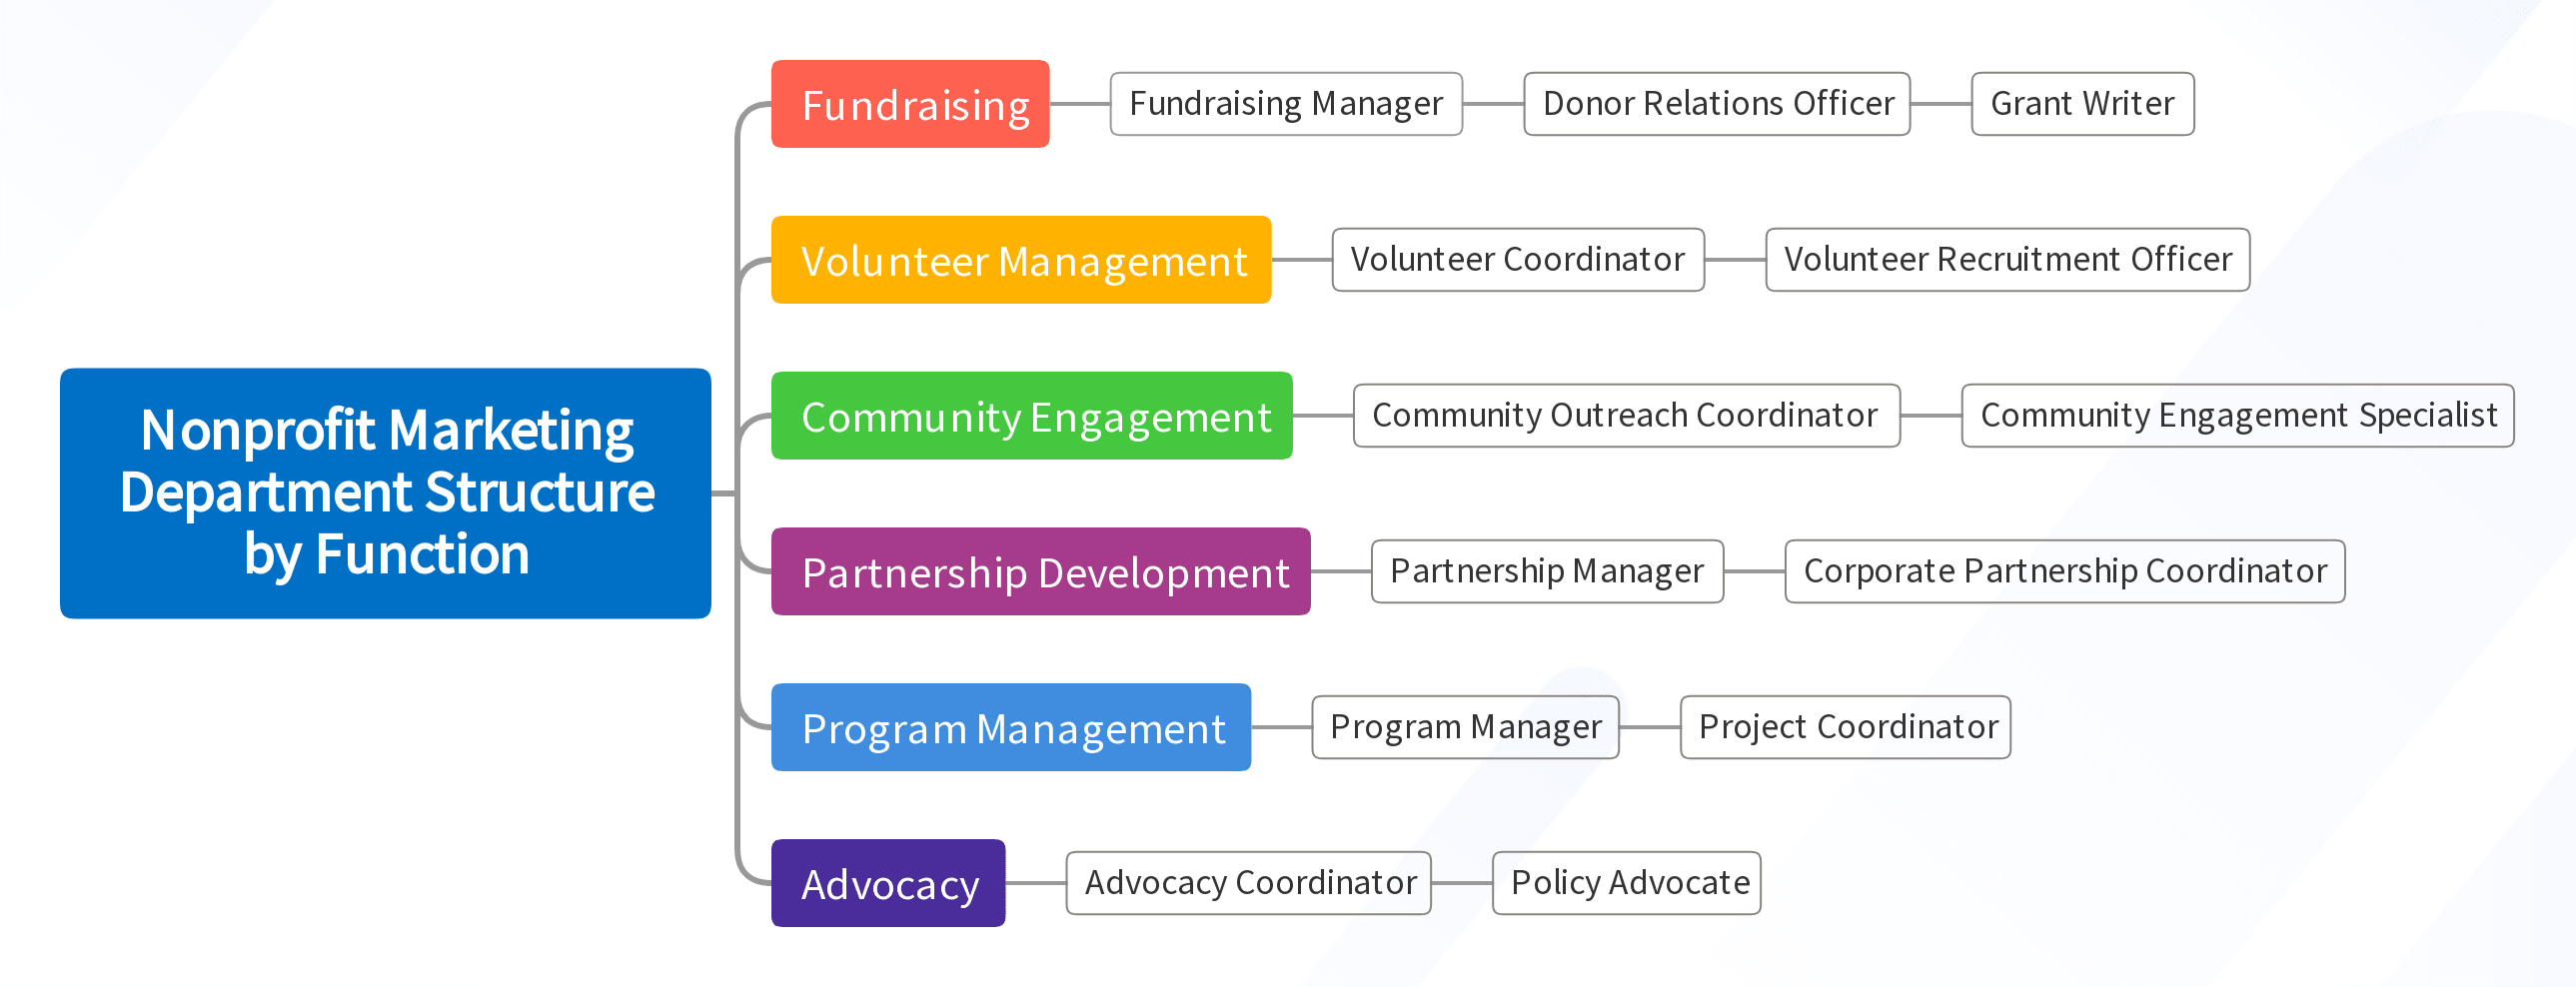 Nonprofit Marketing Department Structure by Function